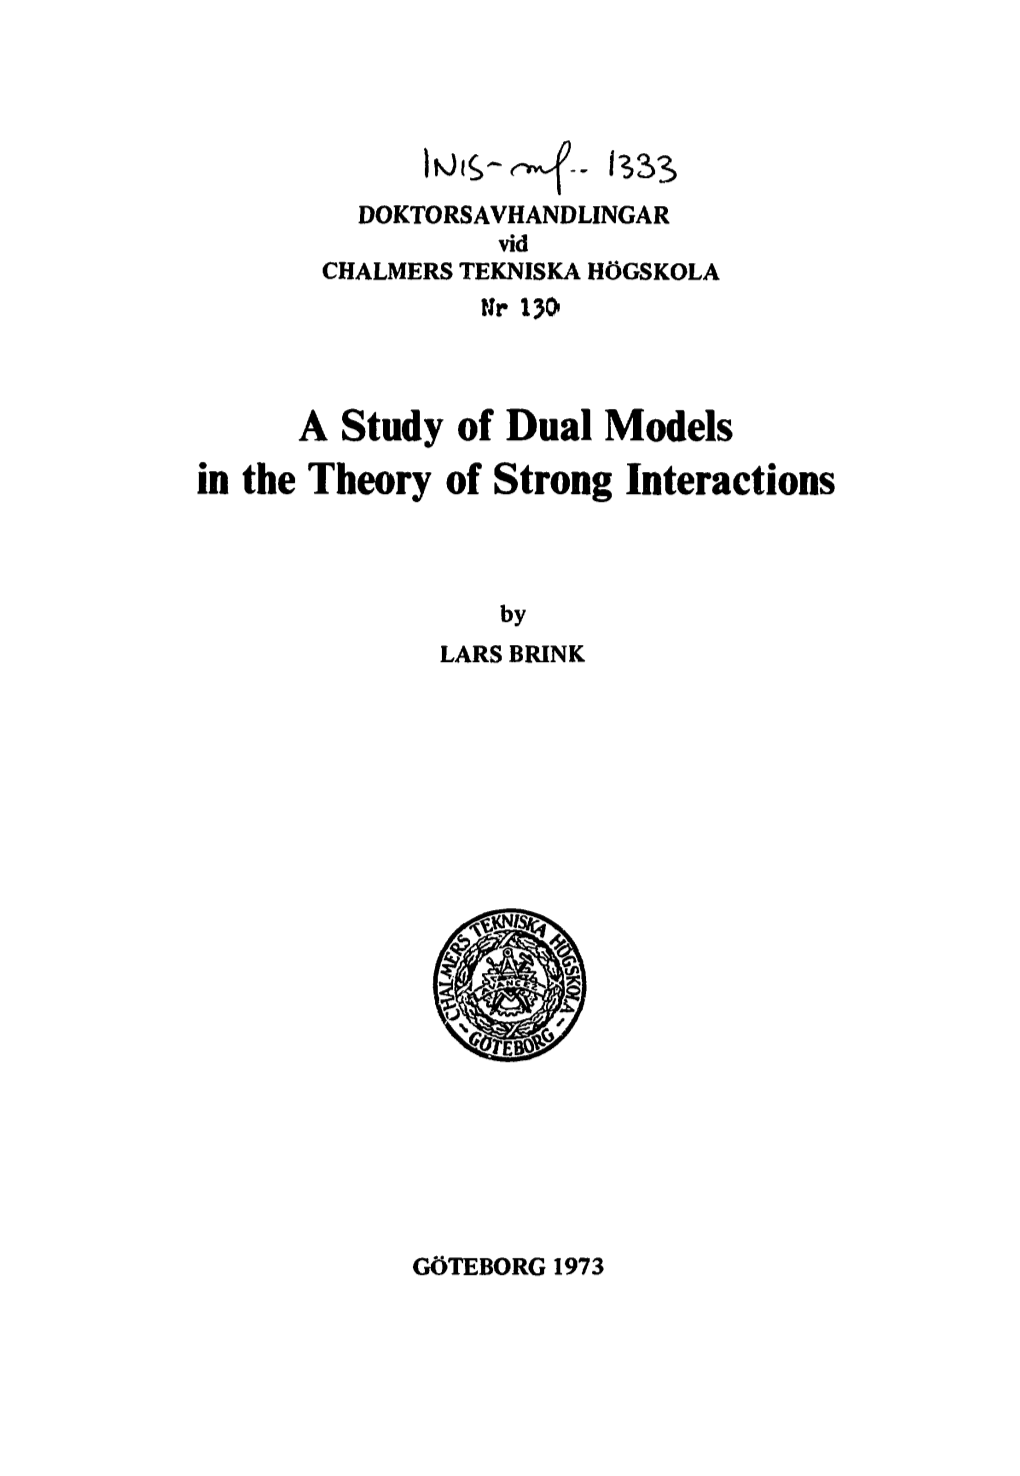 A Study of Dual Models in the Theory of Strong Interactions